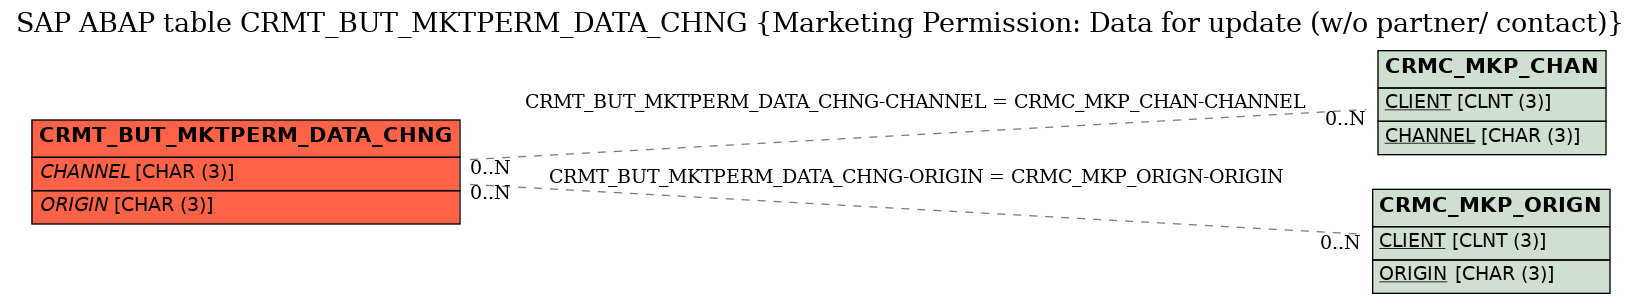 E-R Diagram for table CRMT_BUT_MKTPERM_DATA_CHNG (Marketing Permission: Data for update (w/o partner/ contact))